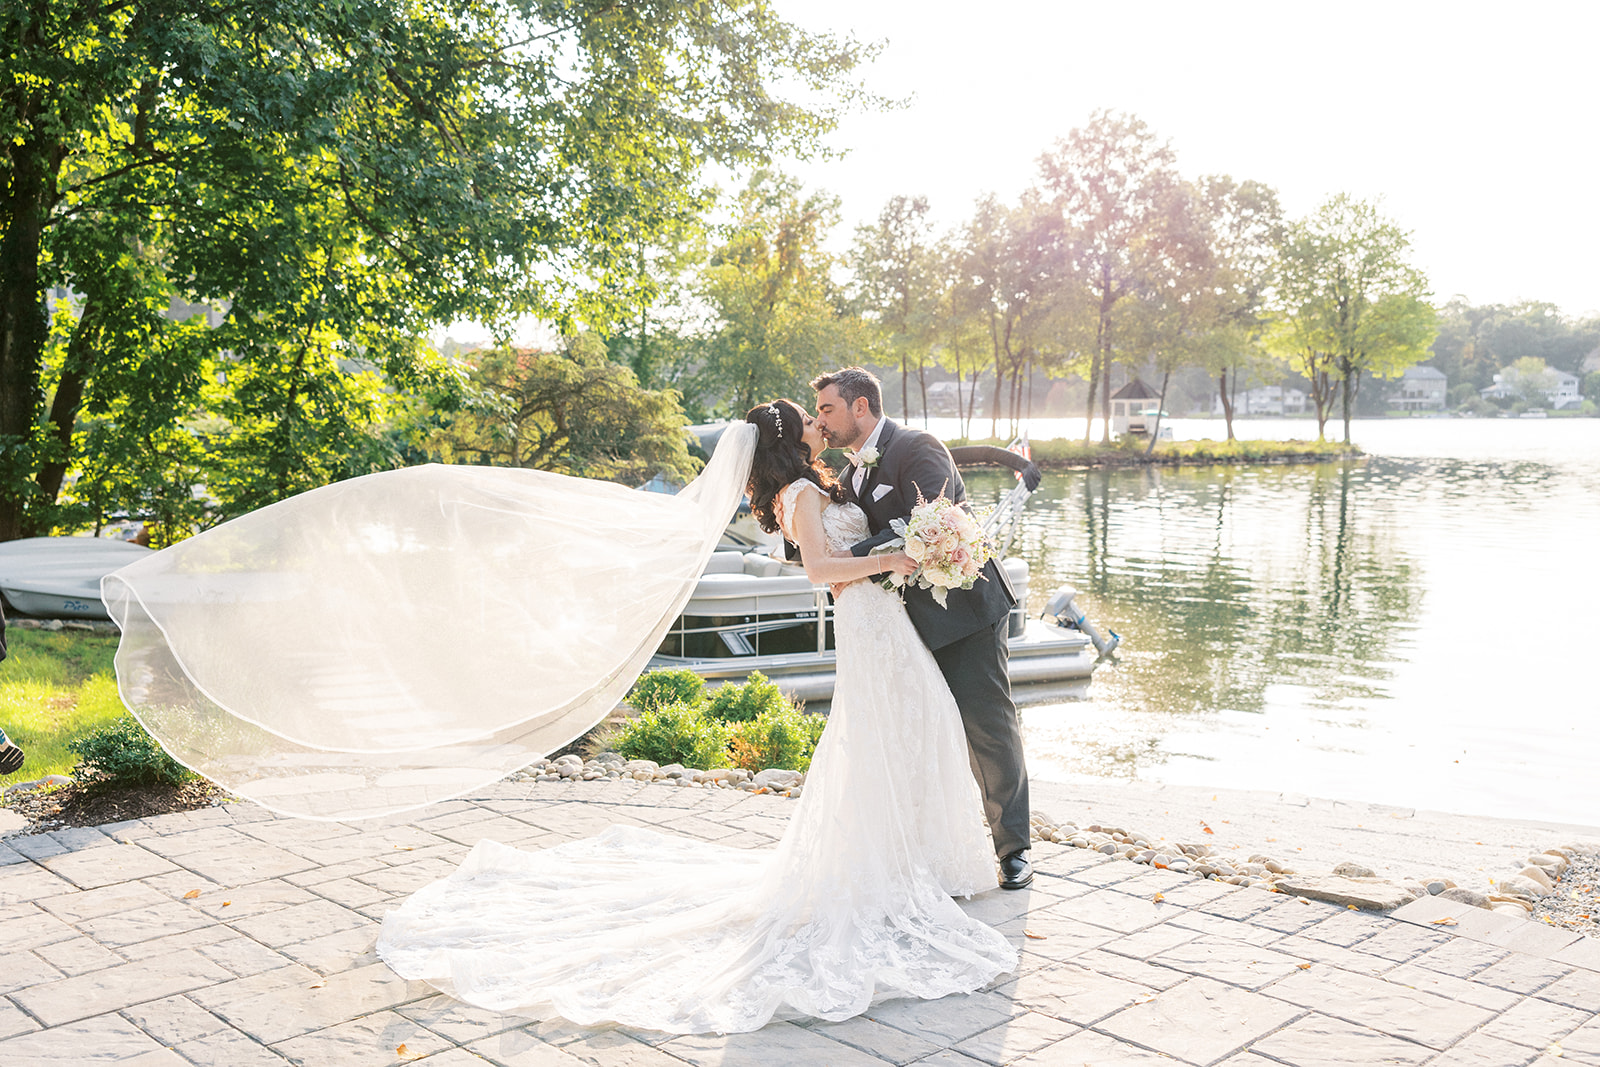 Newlyweds kiss in a waterfront garden as the veil blows in the wind at their Seasons Catering Wedding